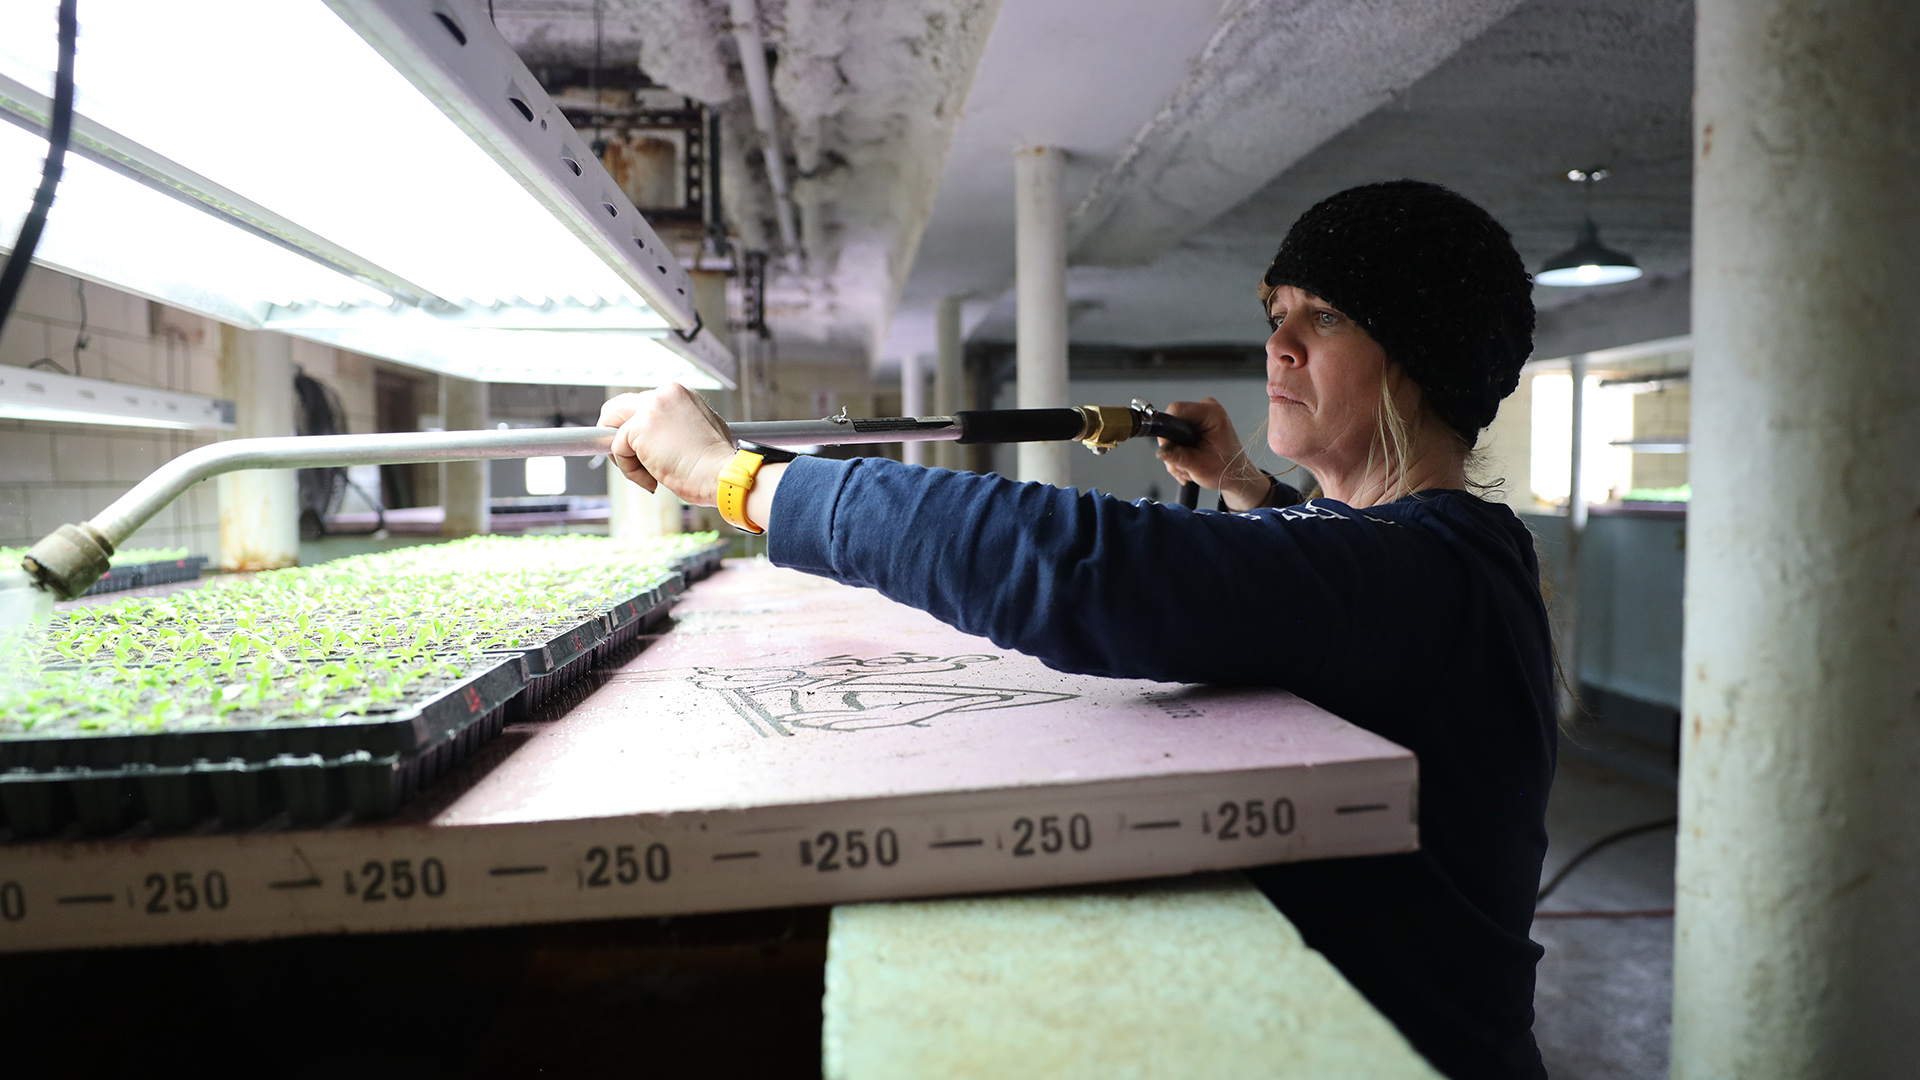 Sarah Bressler uses a watering wand connected to a hose to water seedlings growing in starter trays under full-spectrum lights on a platform inside a room with concrete floors, walls and pillars.